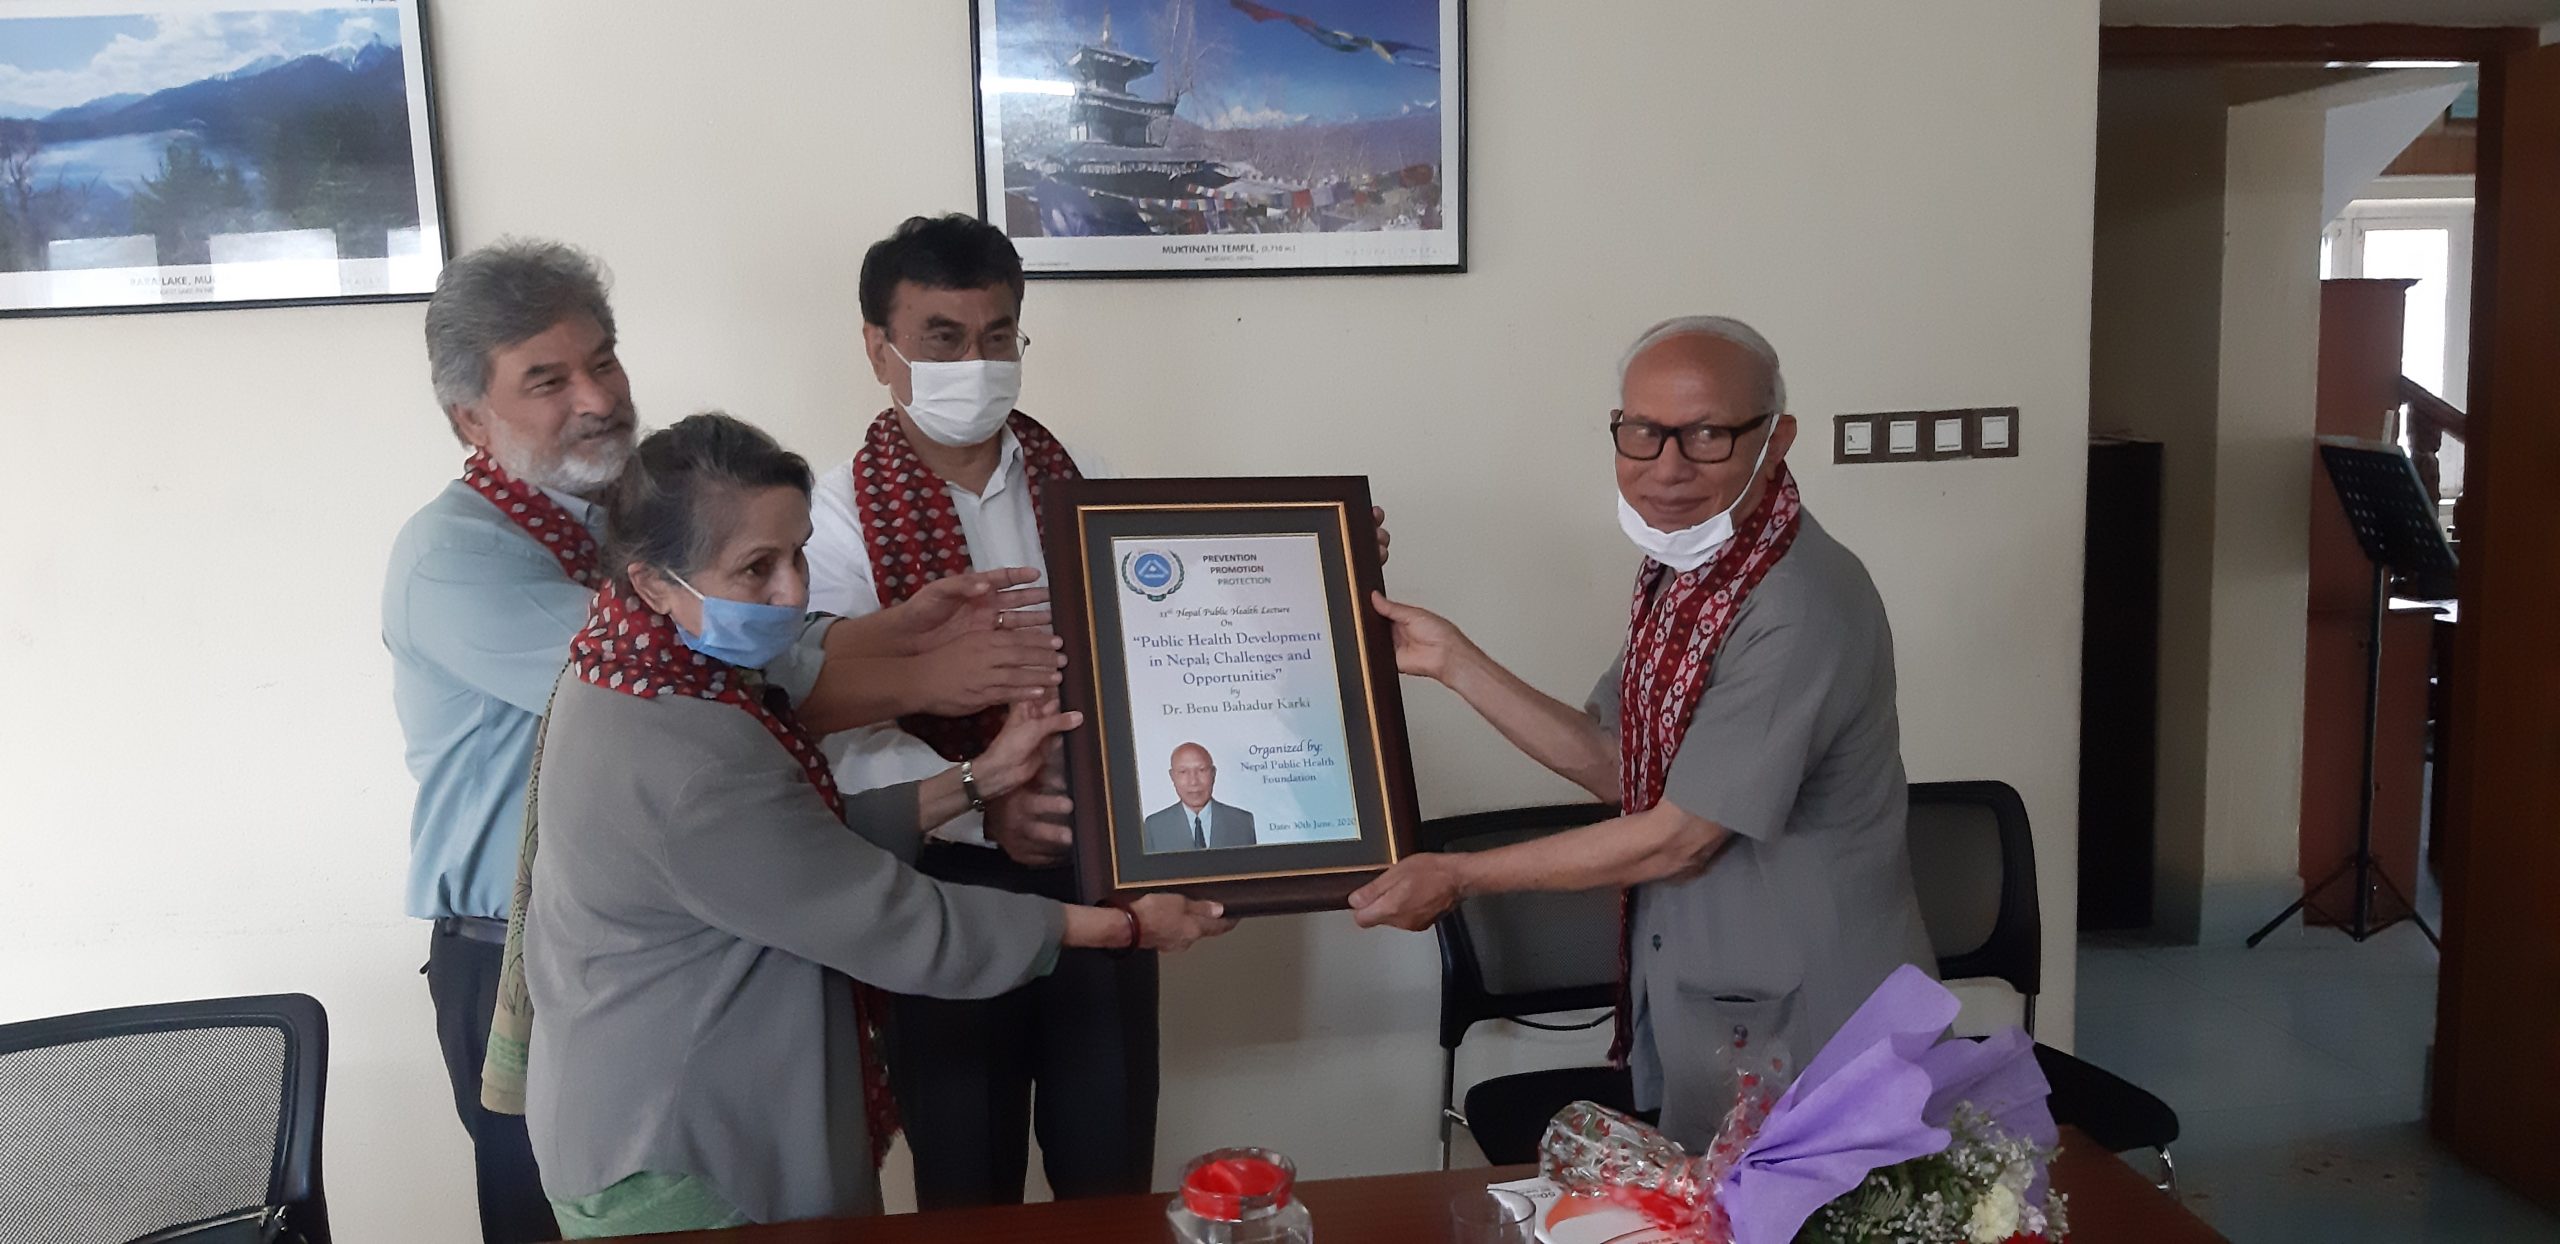 11th Nepal Public Health Foundation Lecture was successfully completed on 30 June, 2020 via ZOOM conference at 11:00 AM. 